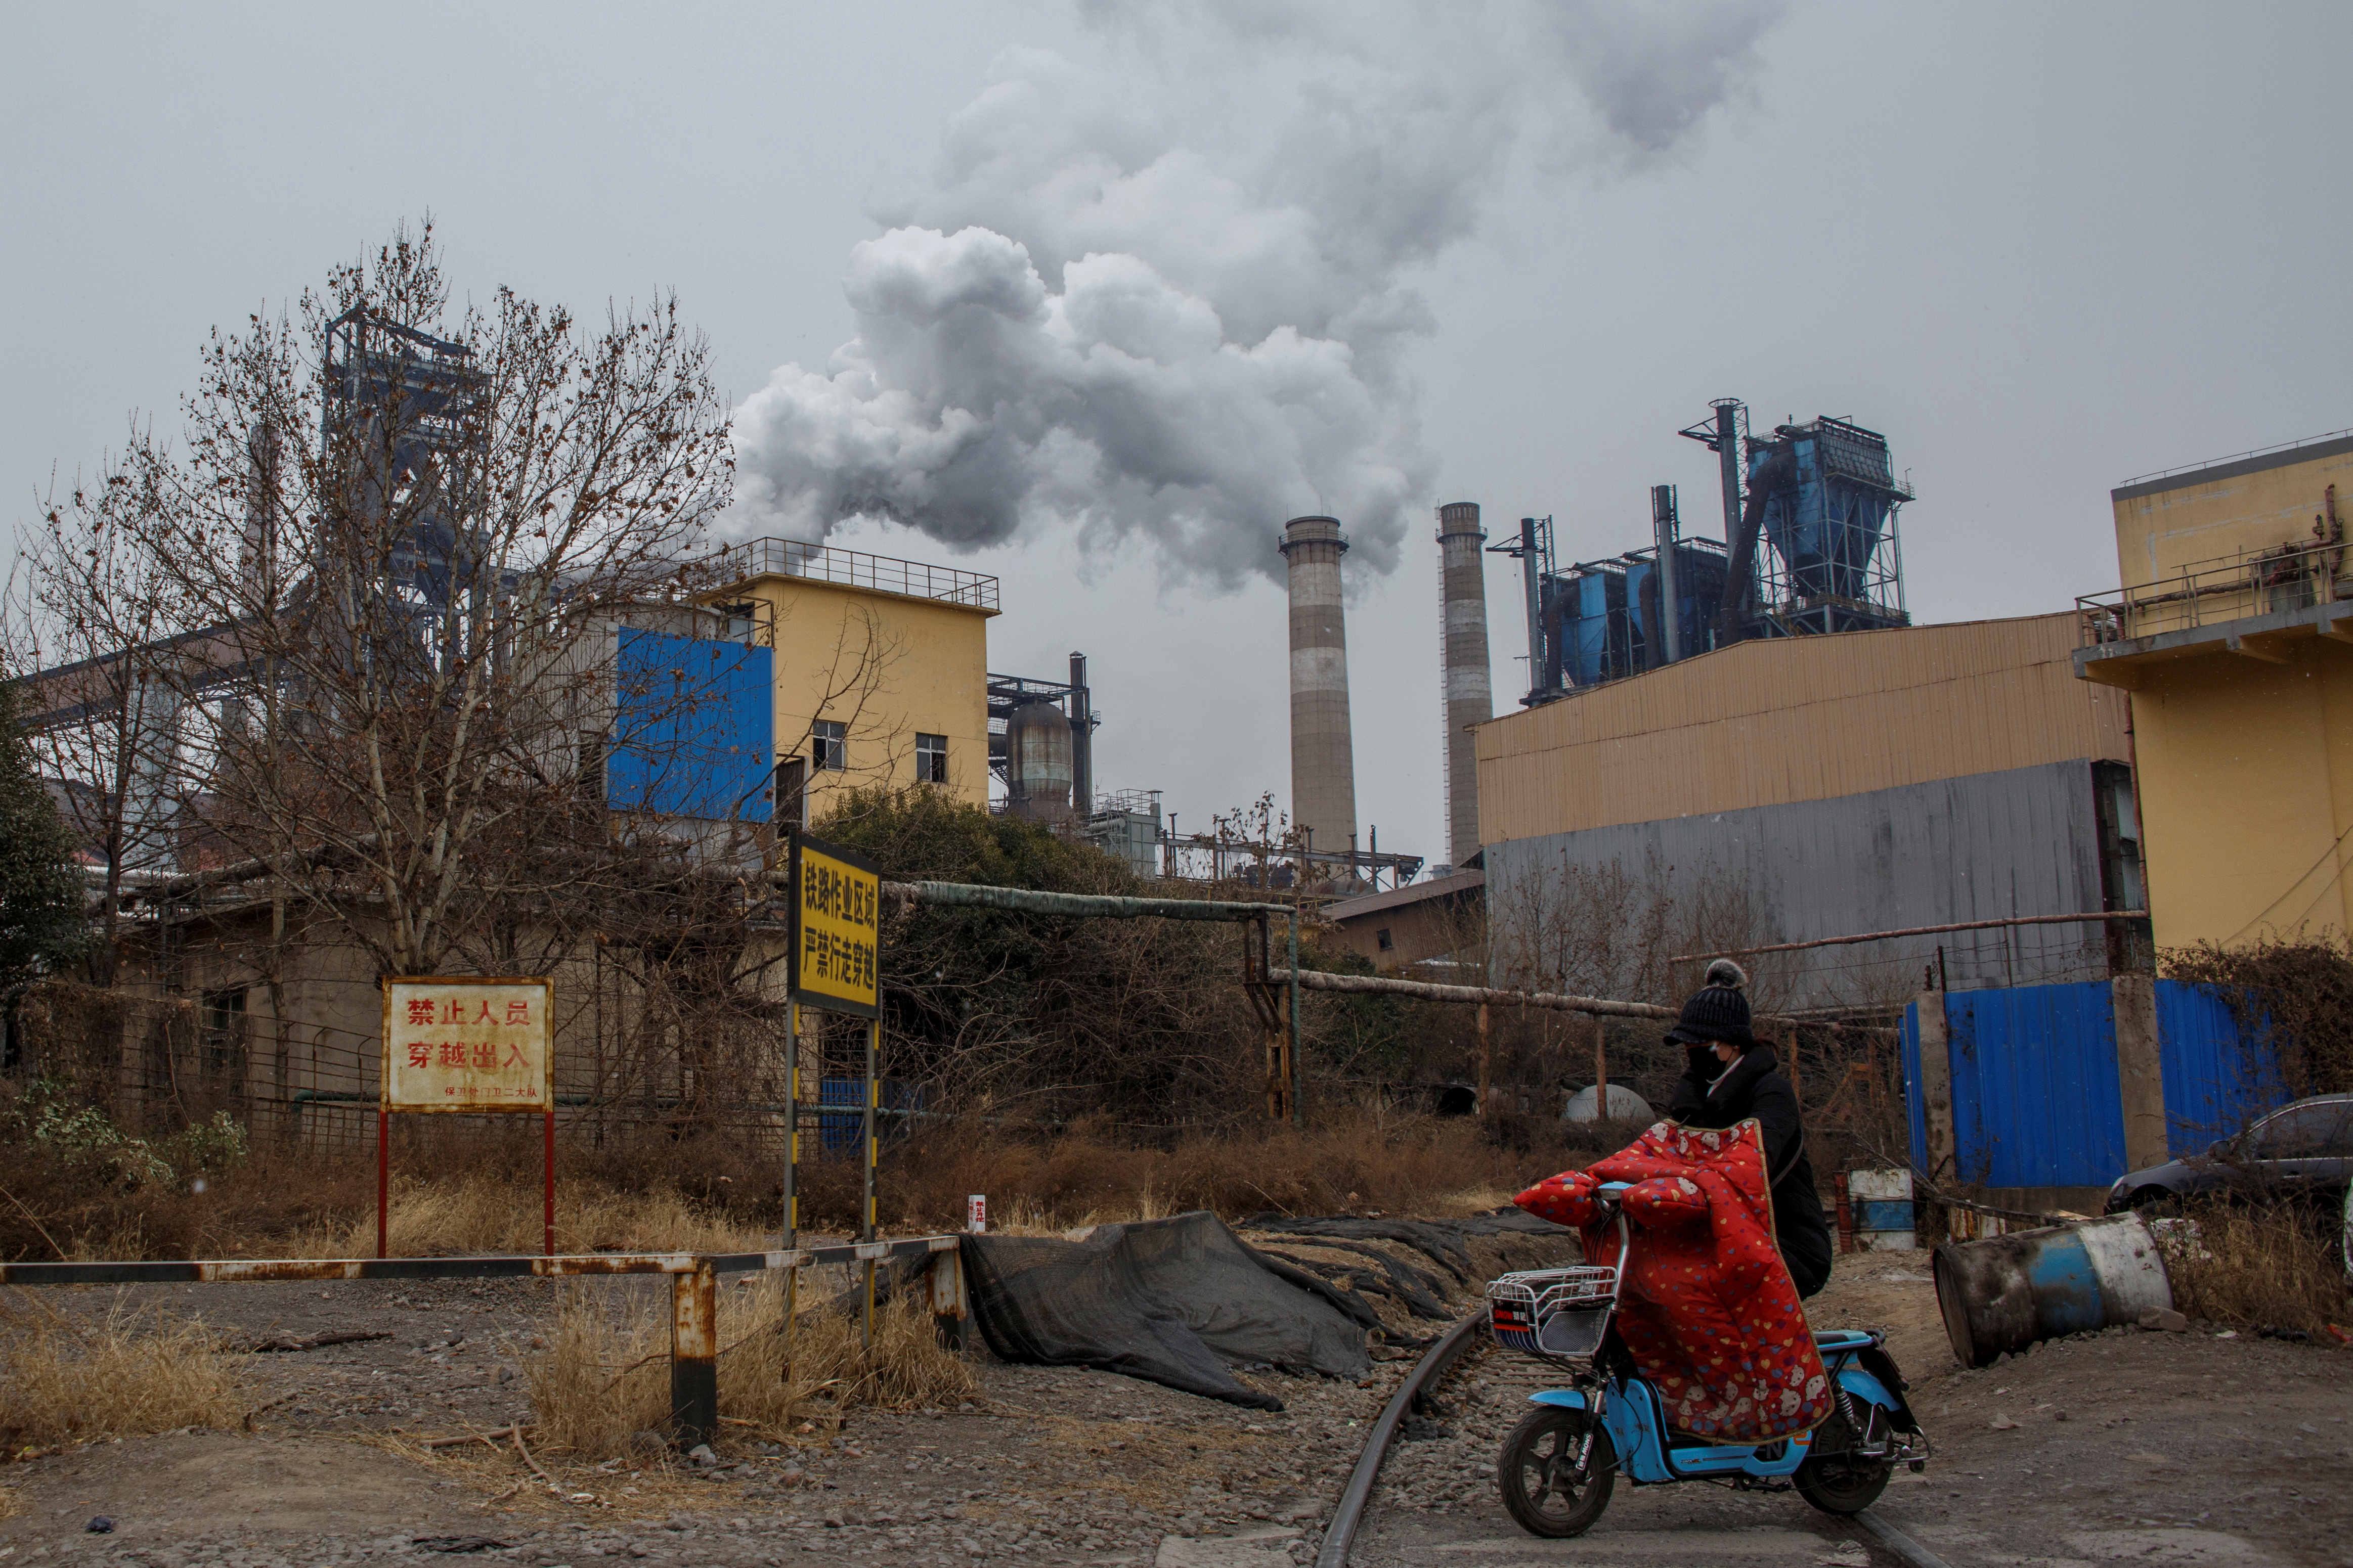 A woman rides a scooter past a steel plant in Anyang, Henan province, China, February 18, 2019. Picture taken February 18, 2019.  REUTERS/Thomas Peter